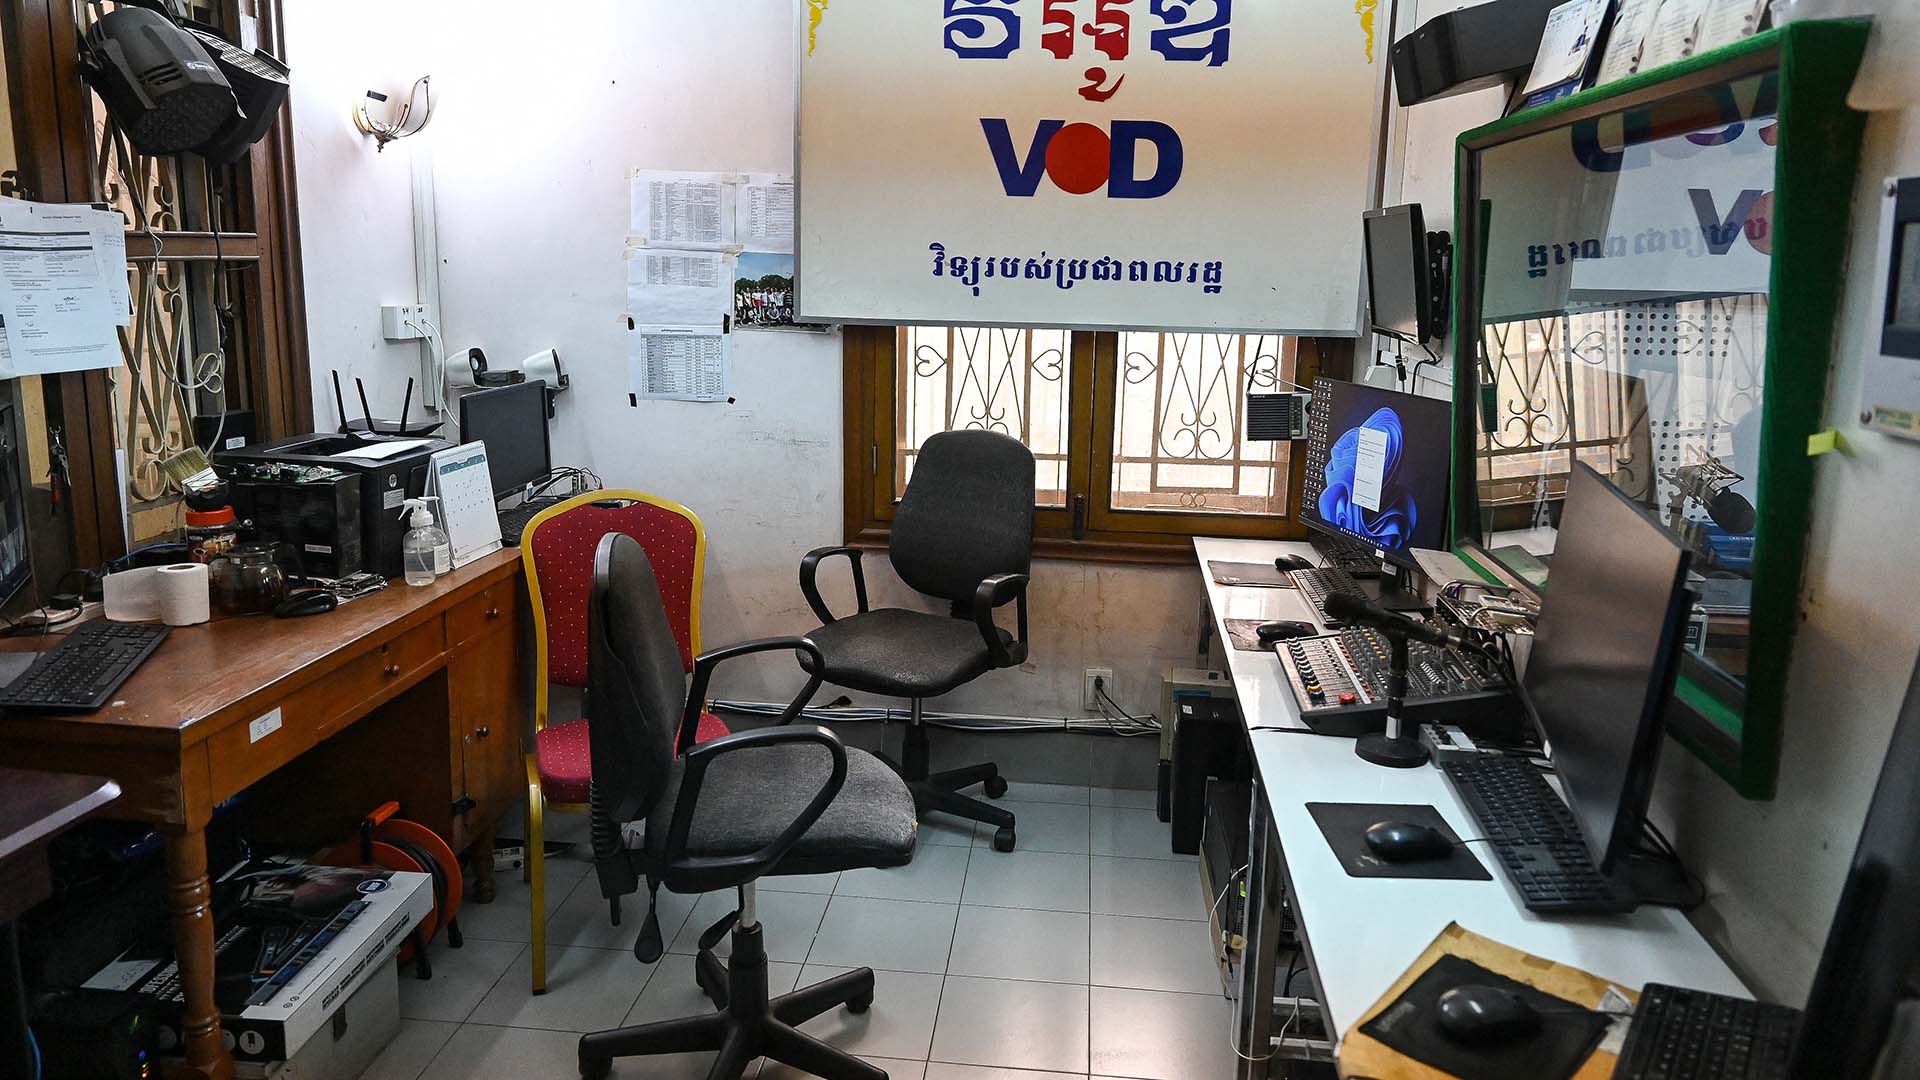 ICIJ Cambodian media partner has no hope of reopening after forced government closure